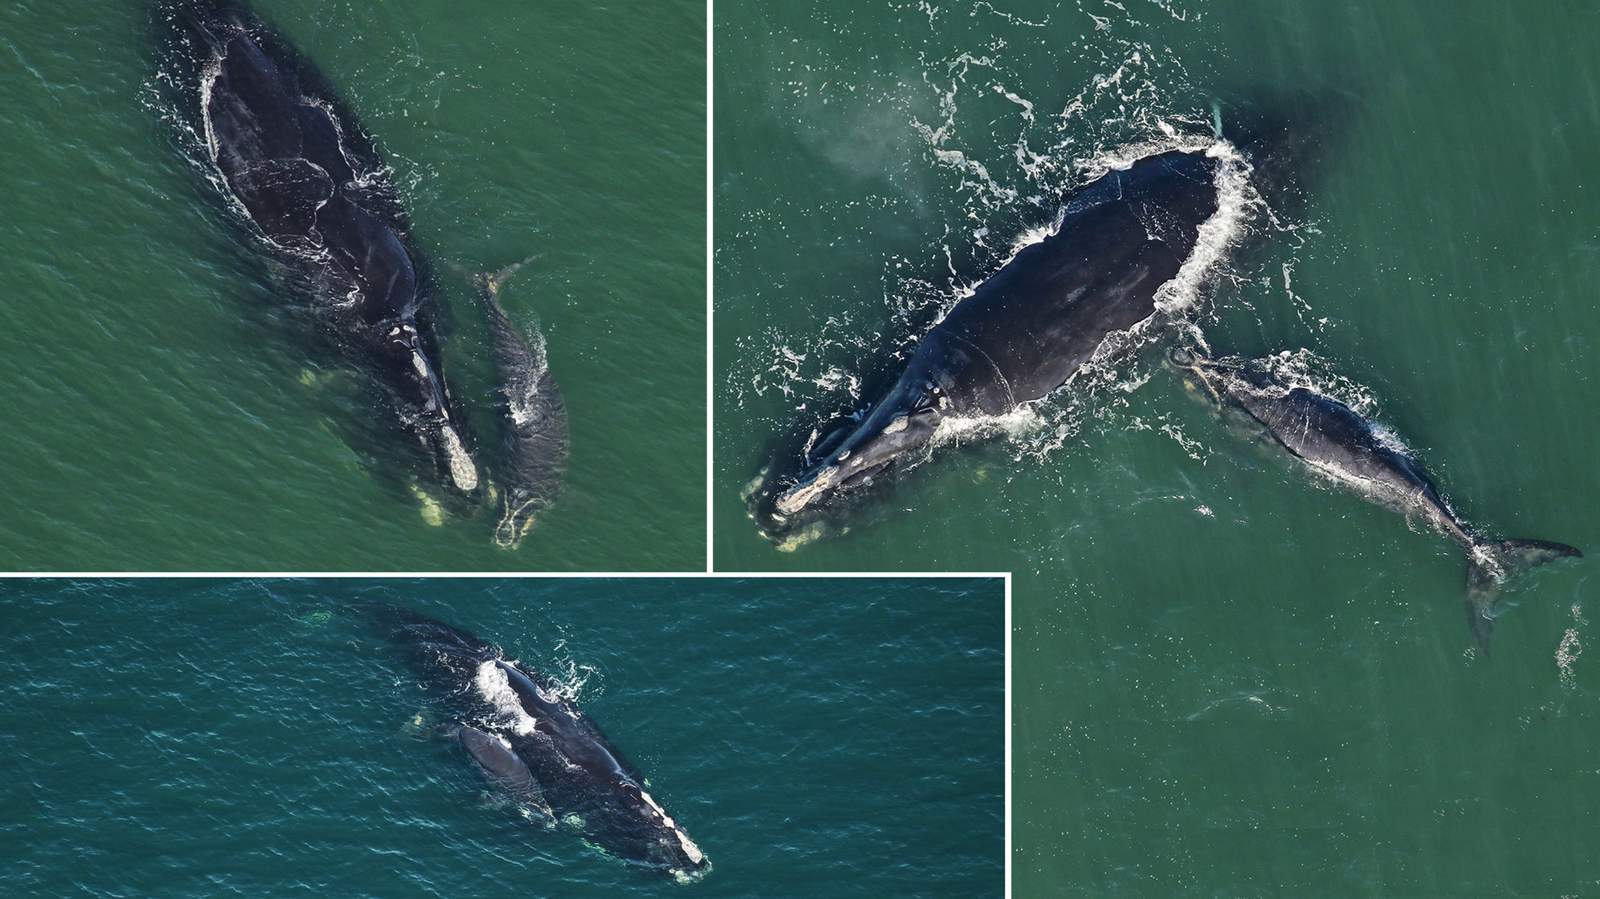 Endangered right whale calving season is now underway